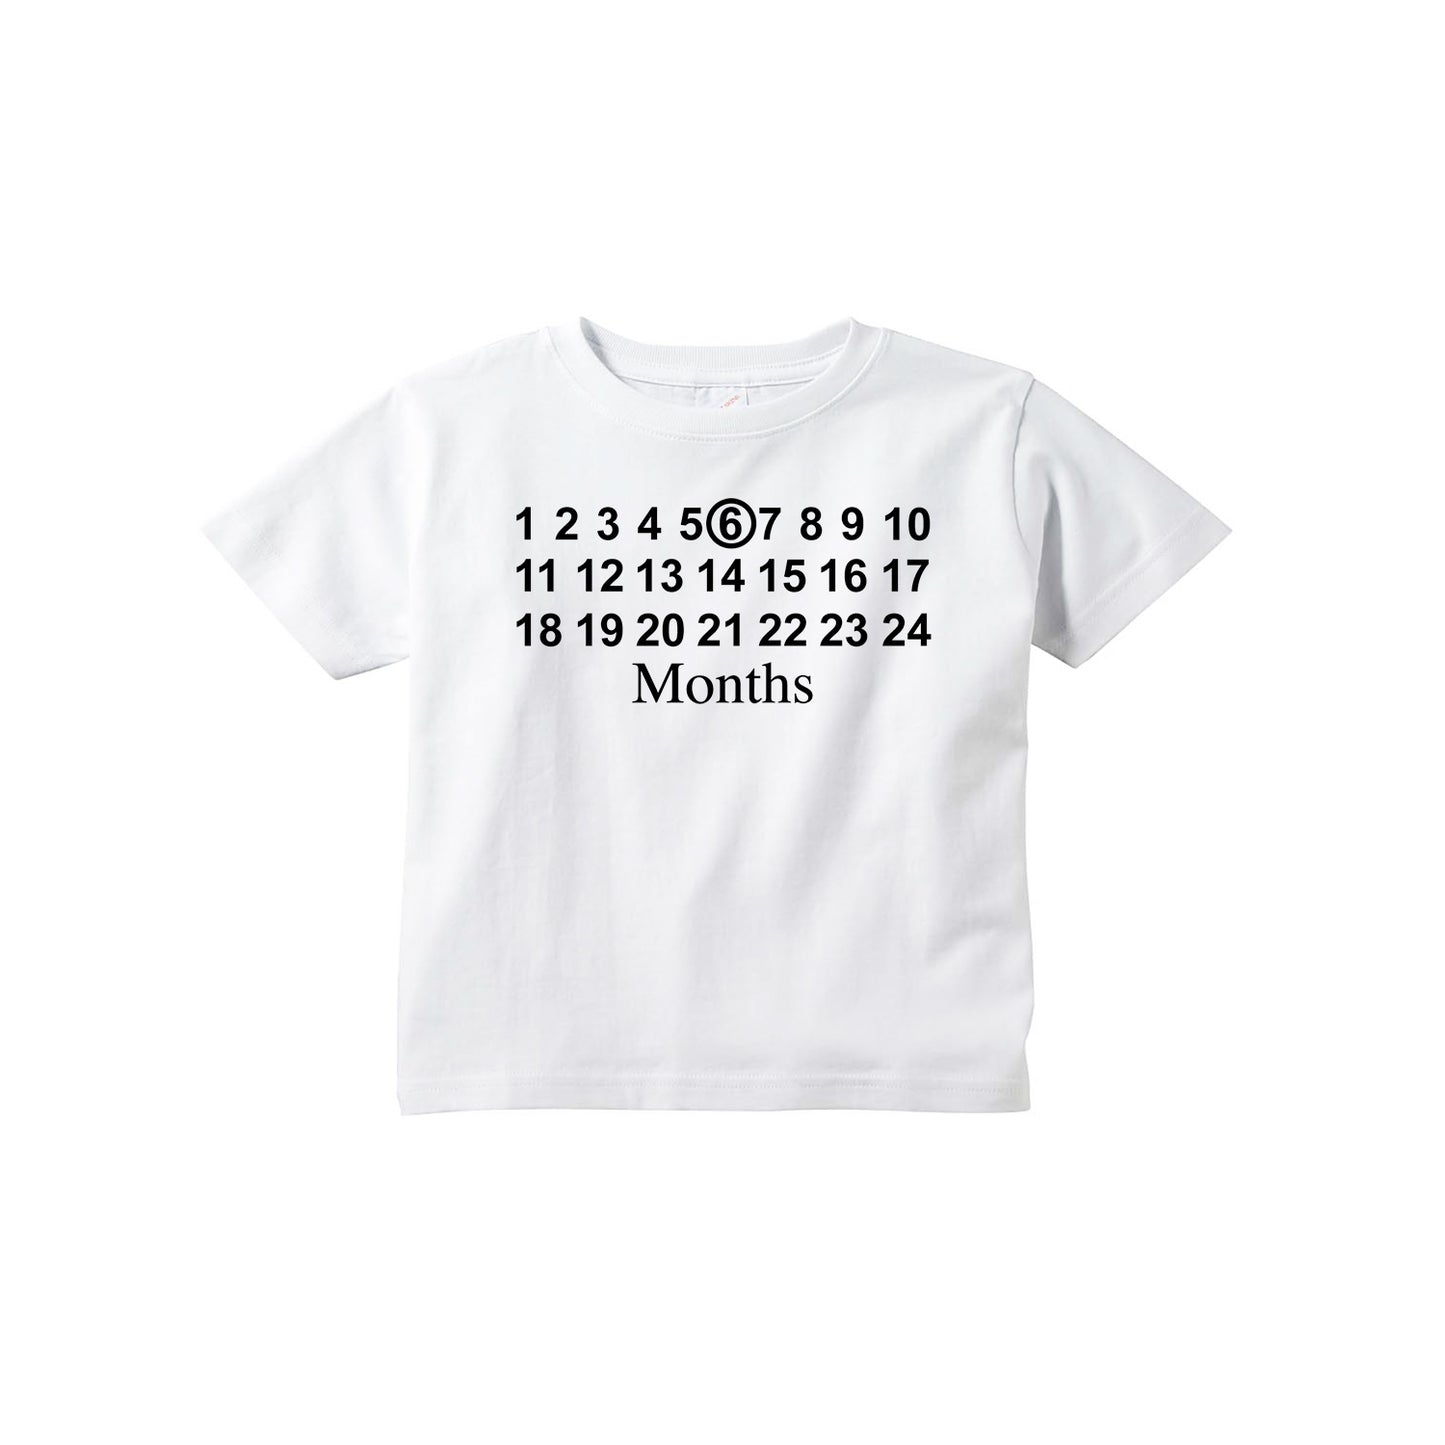 MMonths T-Shirt